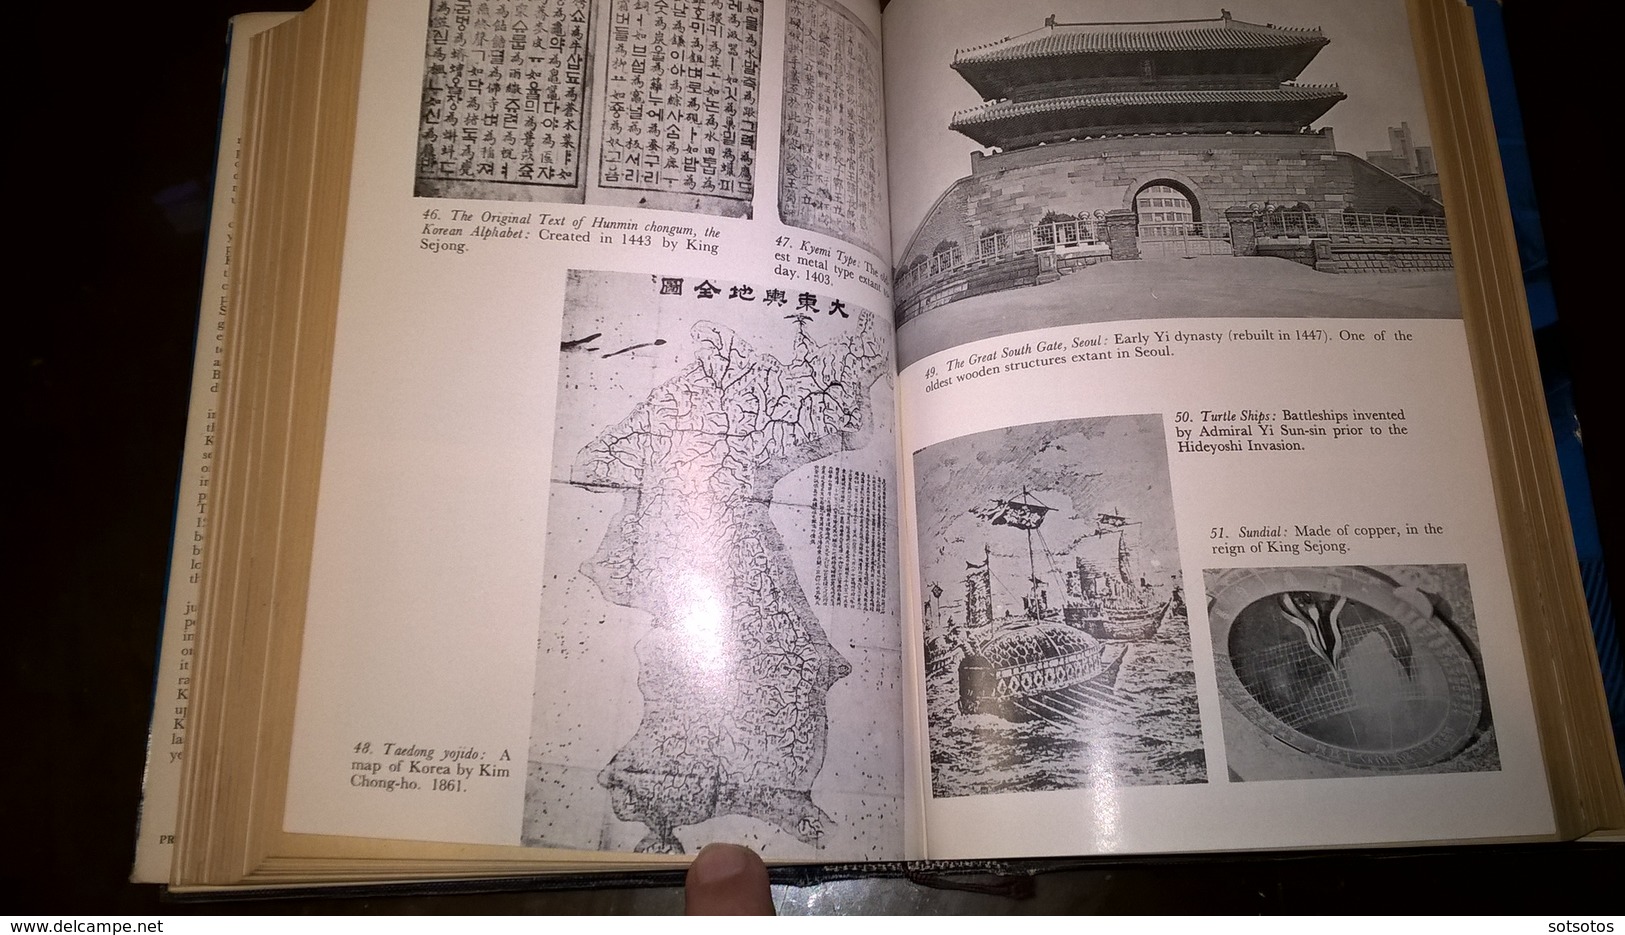 The History of KOREA by Han WOO-KEUN, Ed. Gr. MINTZ (1972), 552 pgs (16Χ23,50 cent) - IN VERY GOOD CONDITION